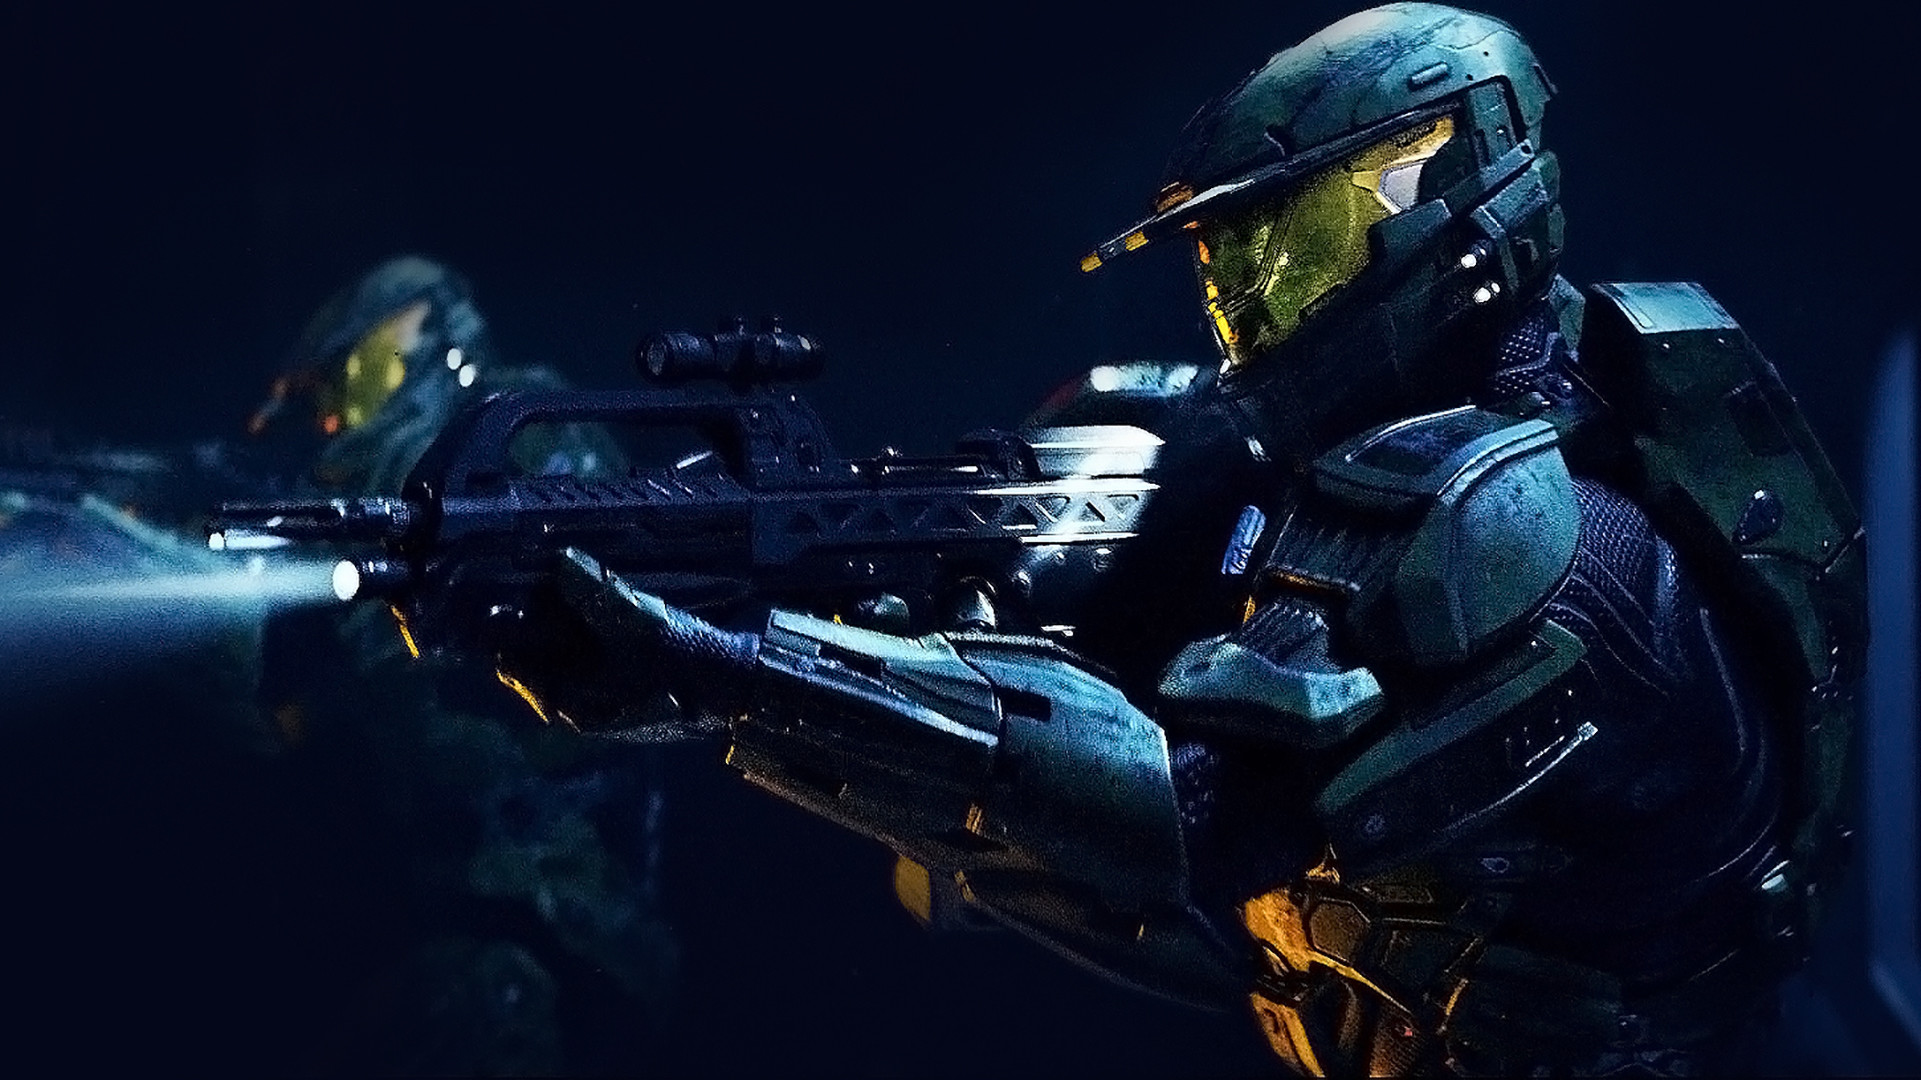 1921x1080 Halo 1920x1080 Wallpapers Optimized for Xbox One 1080p. by RoptorSep 23  2017. Load 1 more imageGrid view